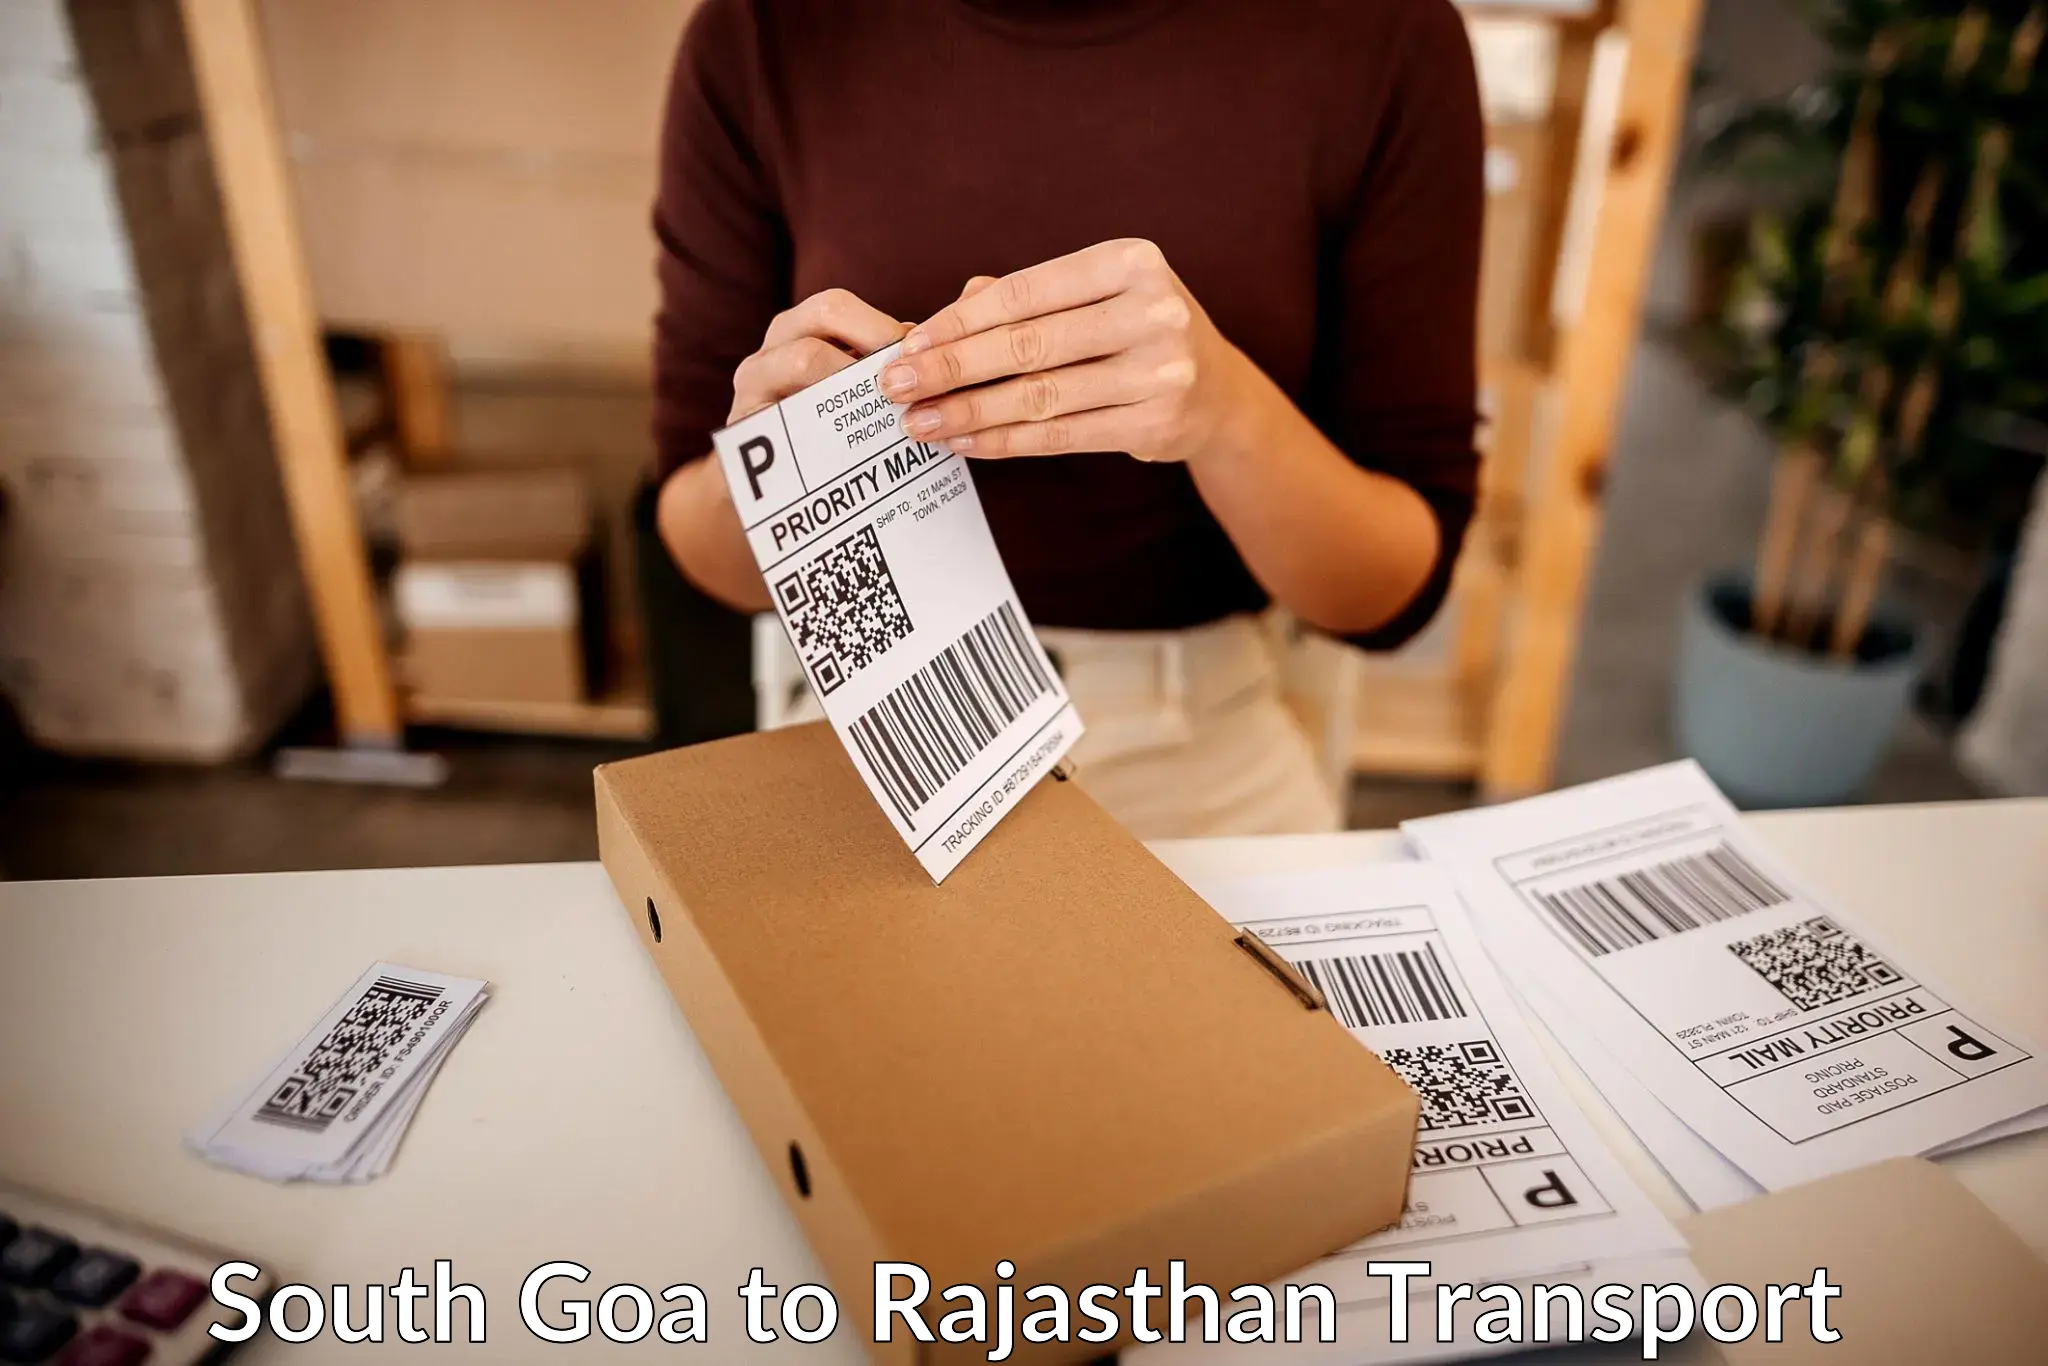 Road transport online services South Goa to Rajasthan